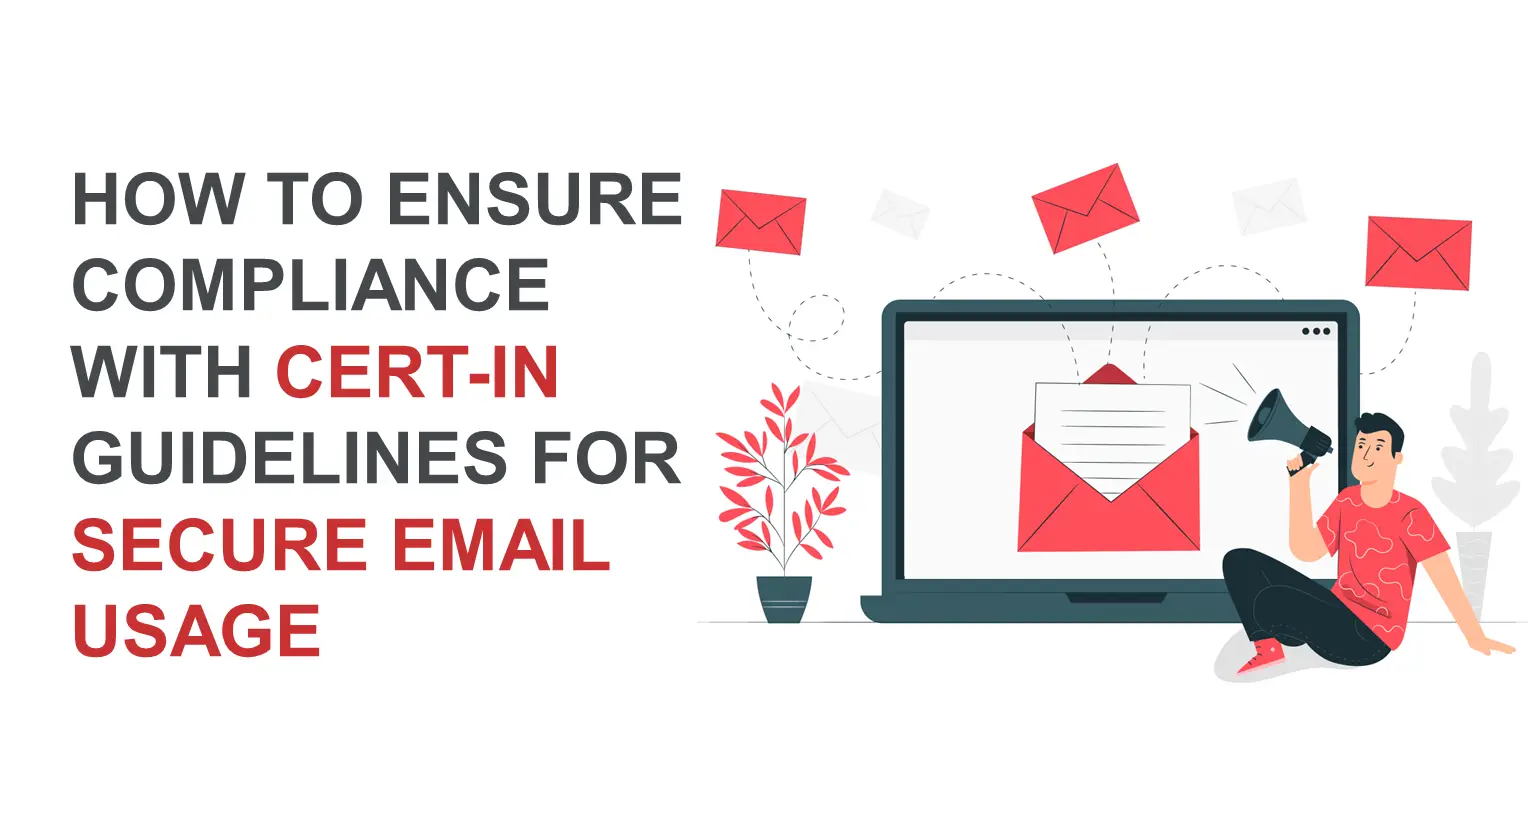 How to ensure compliance with CERT-In guidelines for secure email usage